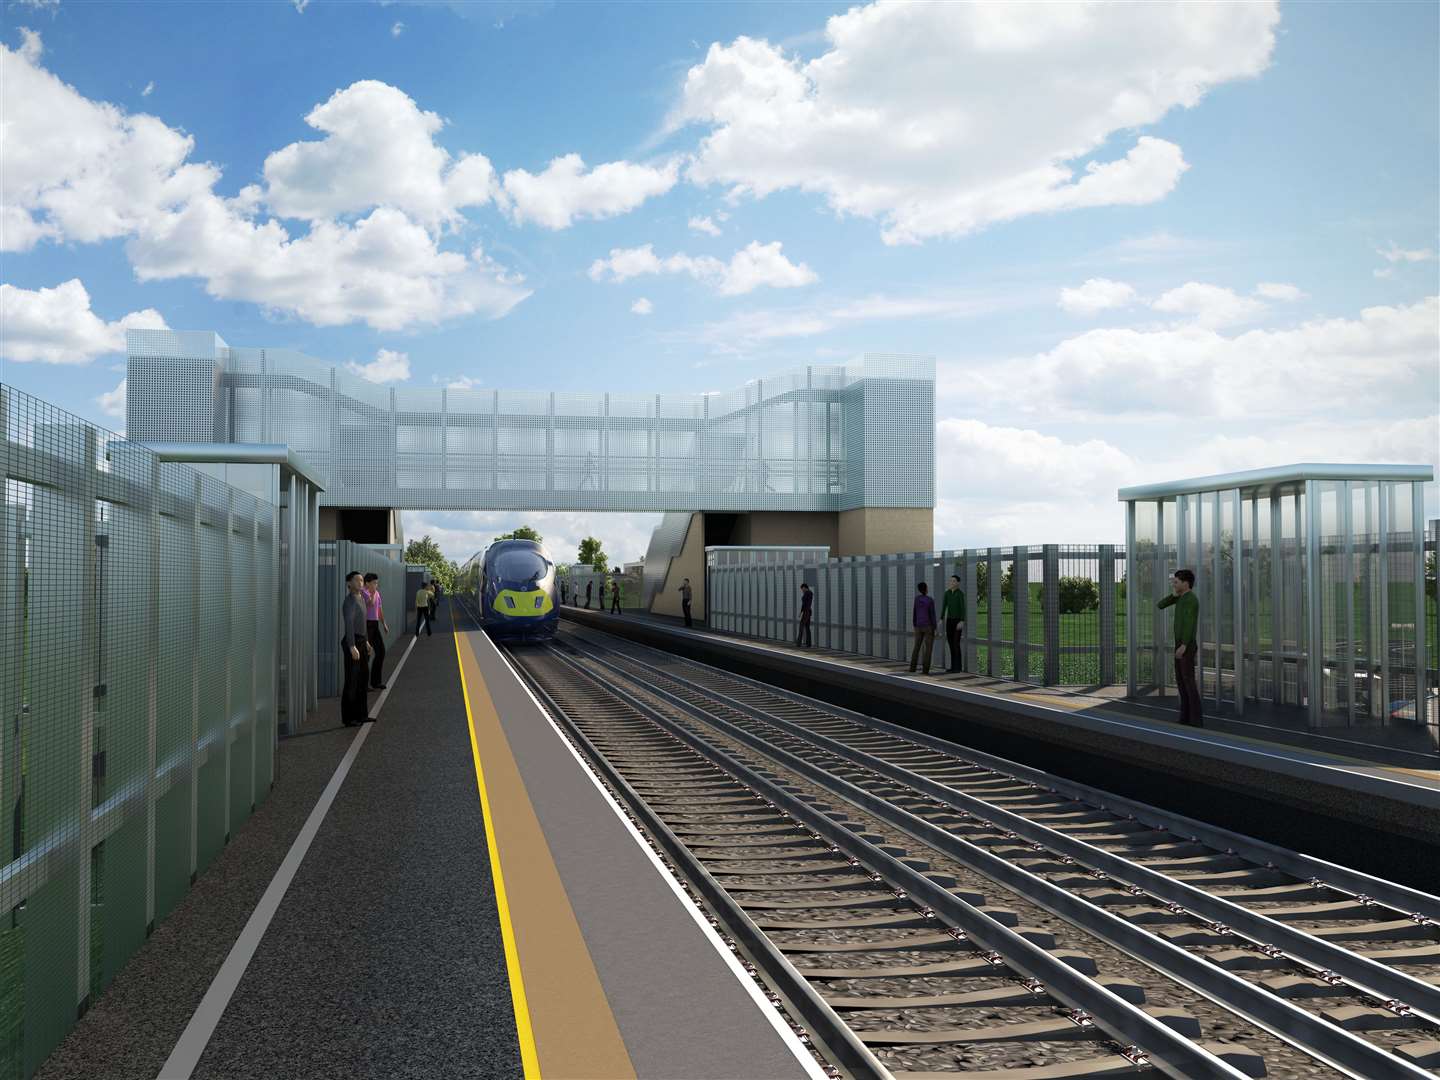 Image of how the Thanet Parkway railway station could look